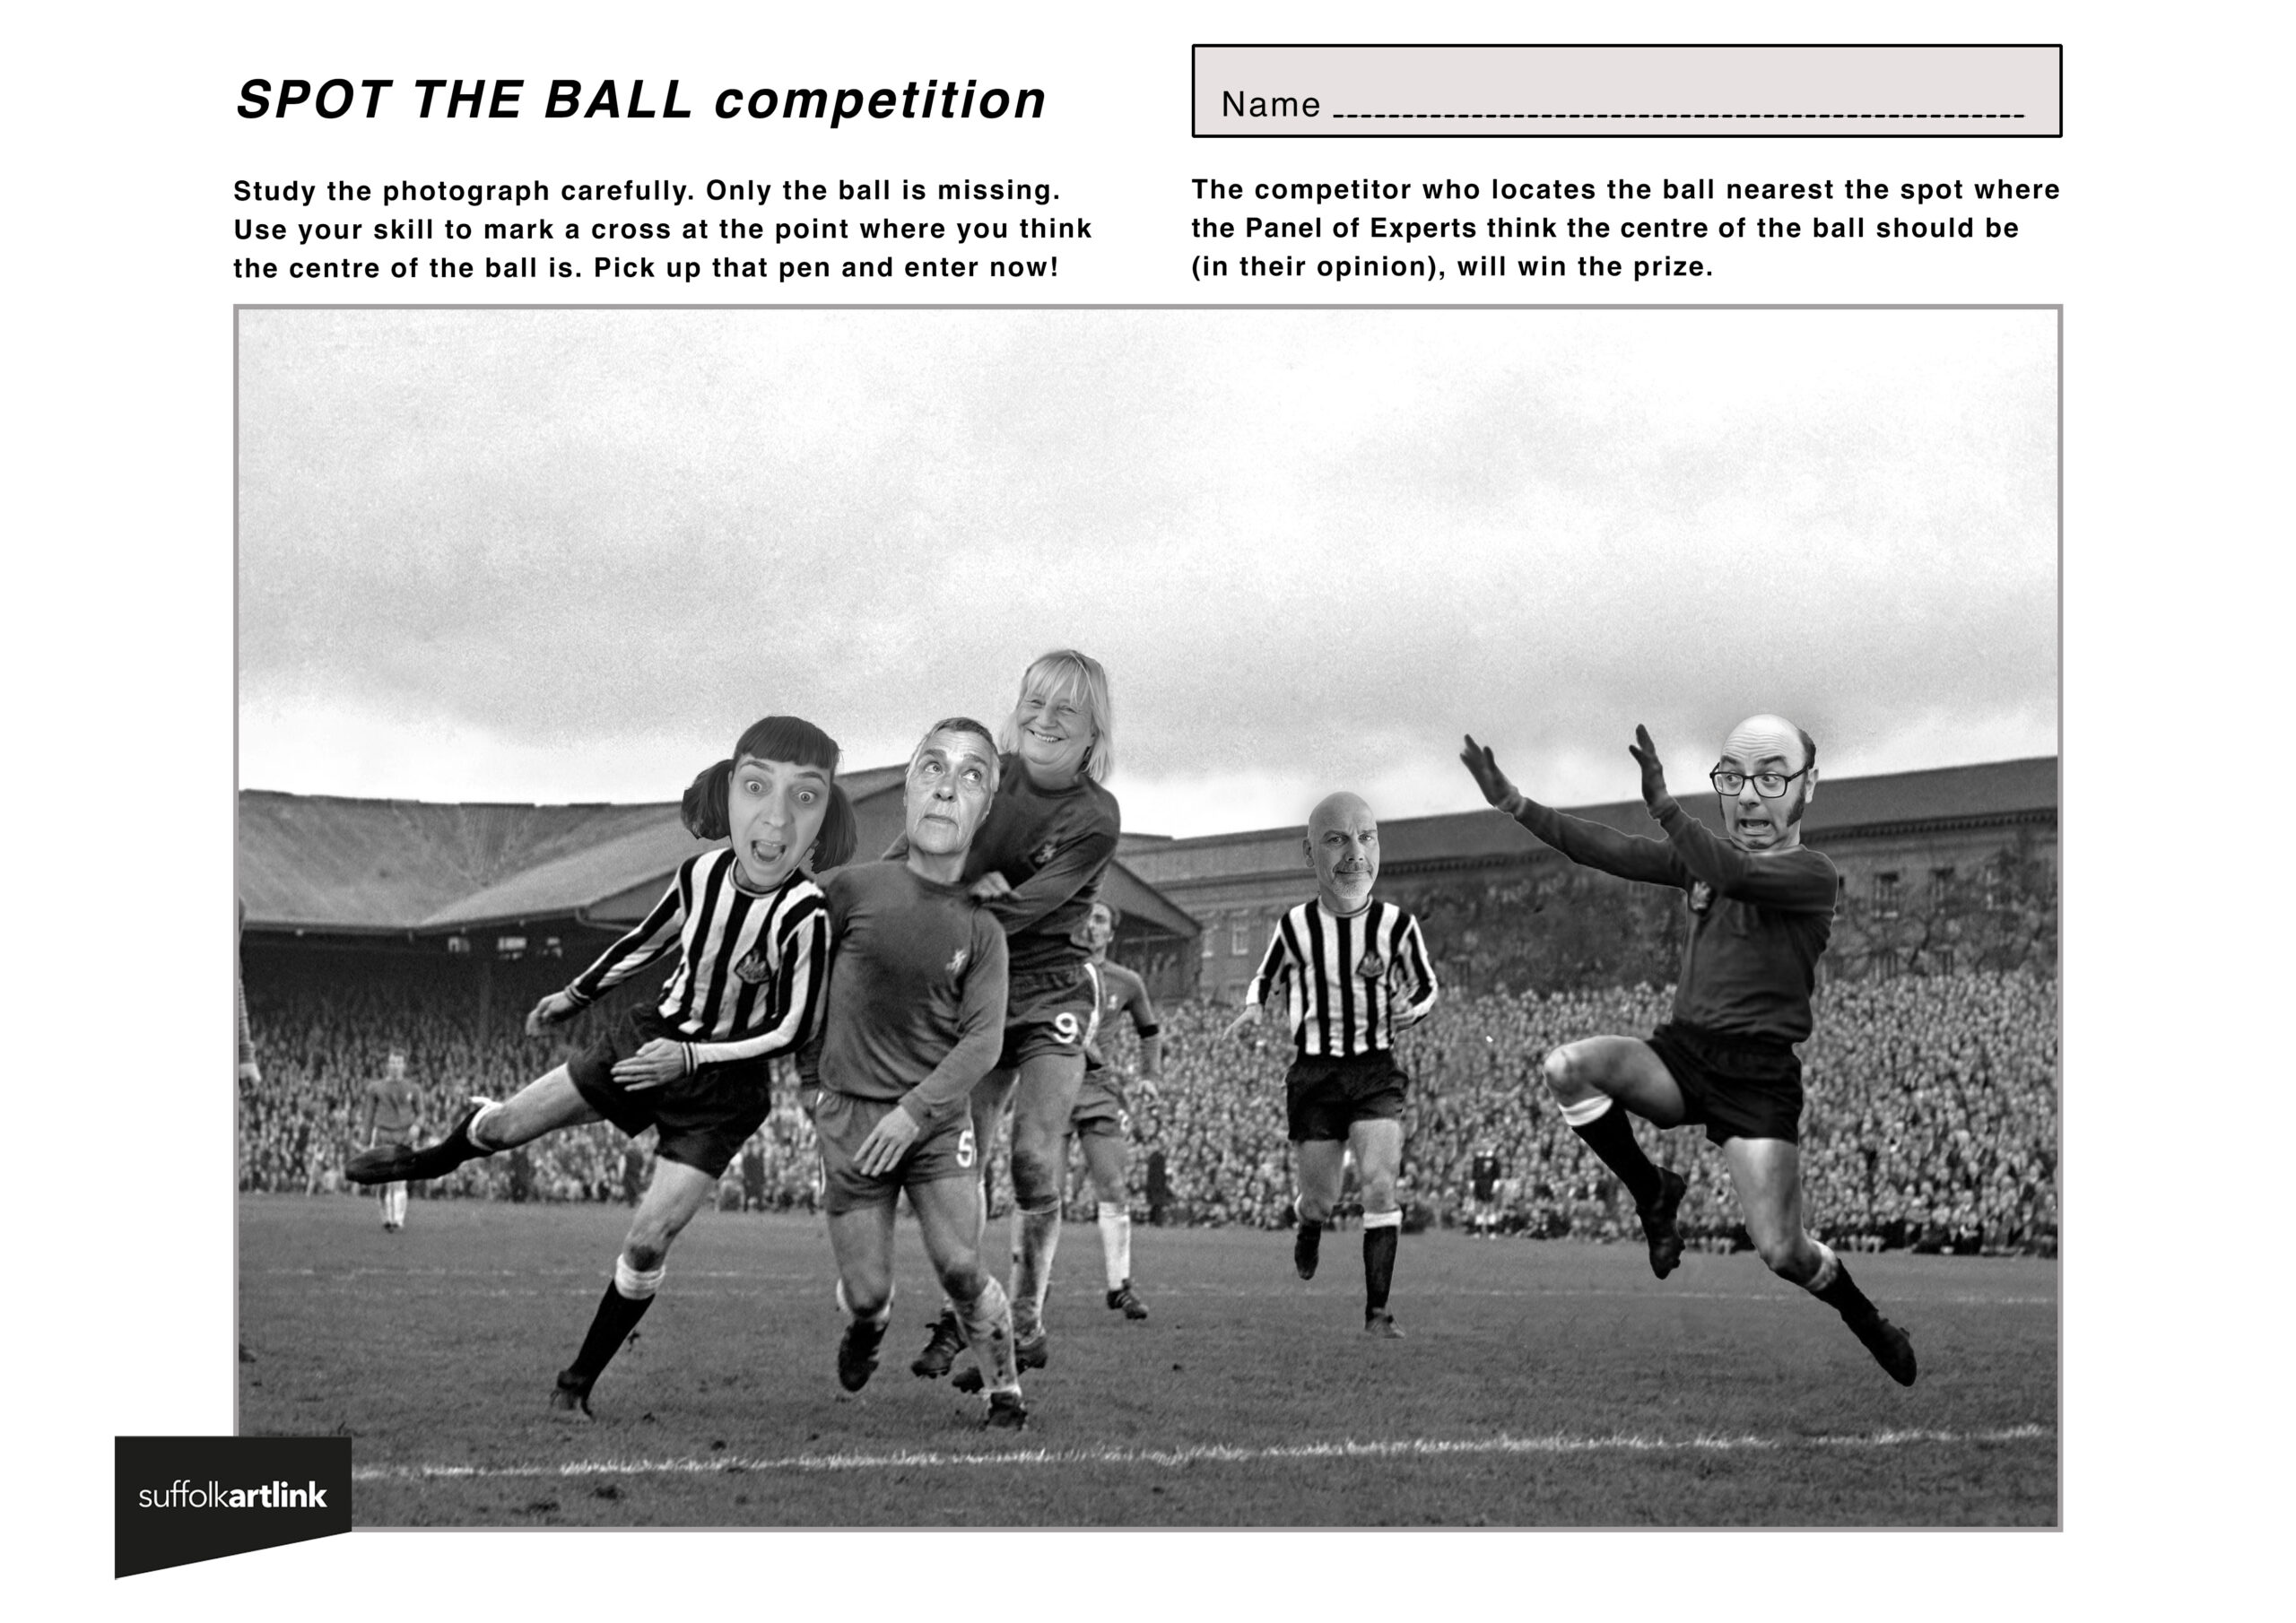 A monochrome photo of a football match with faces of the artists and facilitators imposed onto the bodies